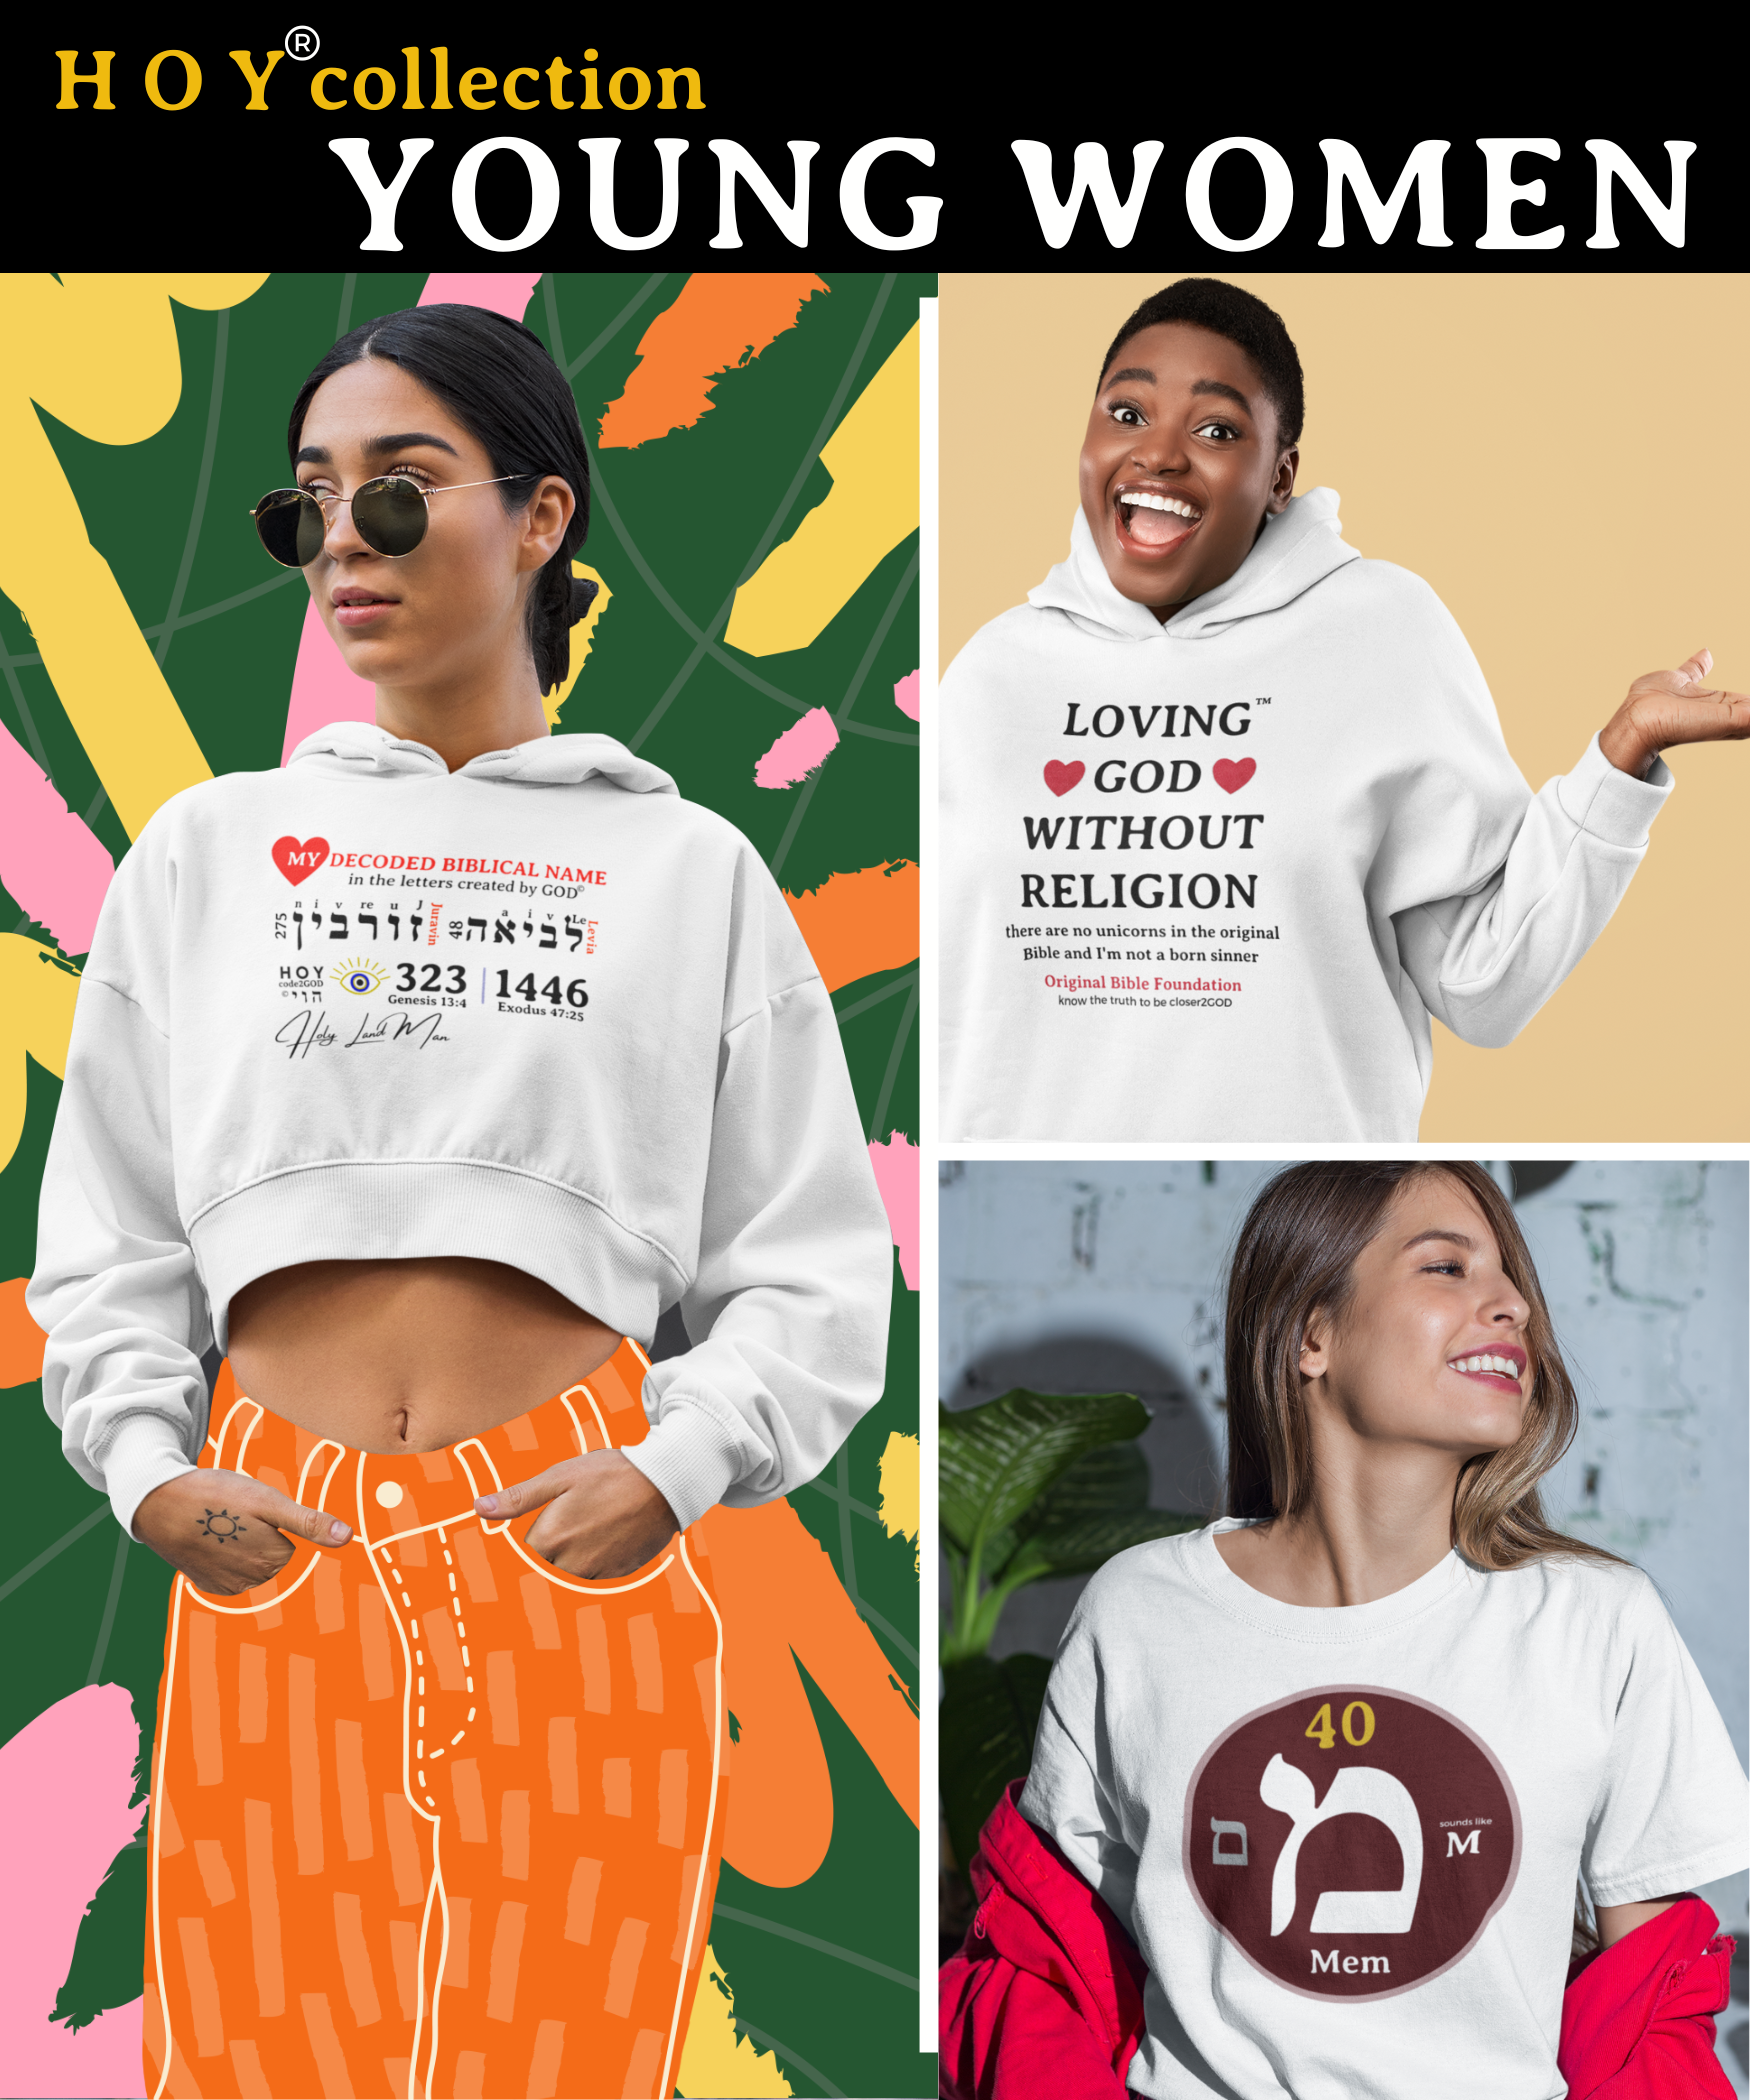 HOY wear young women collection by Original Bible Foundation and Don Juravin